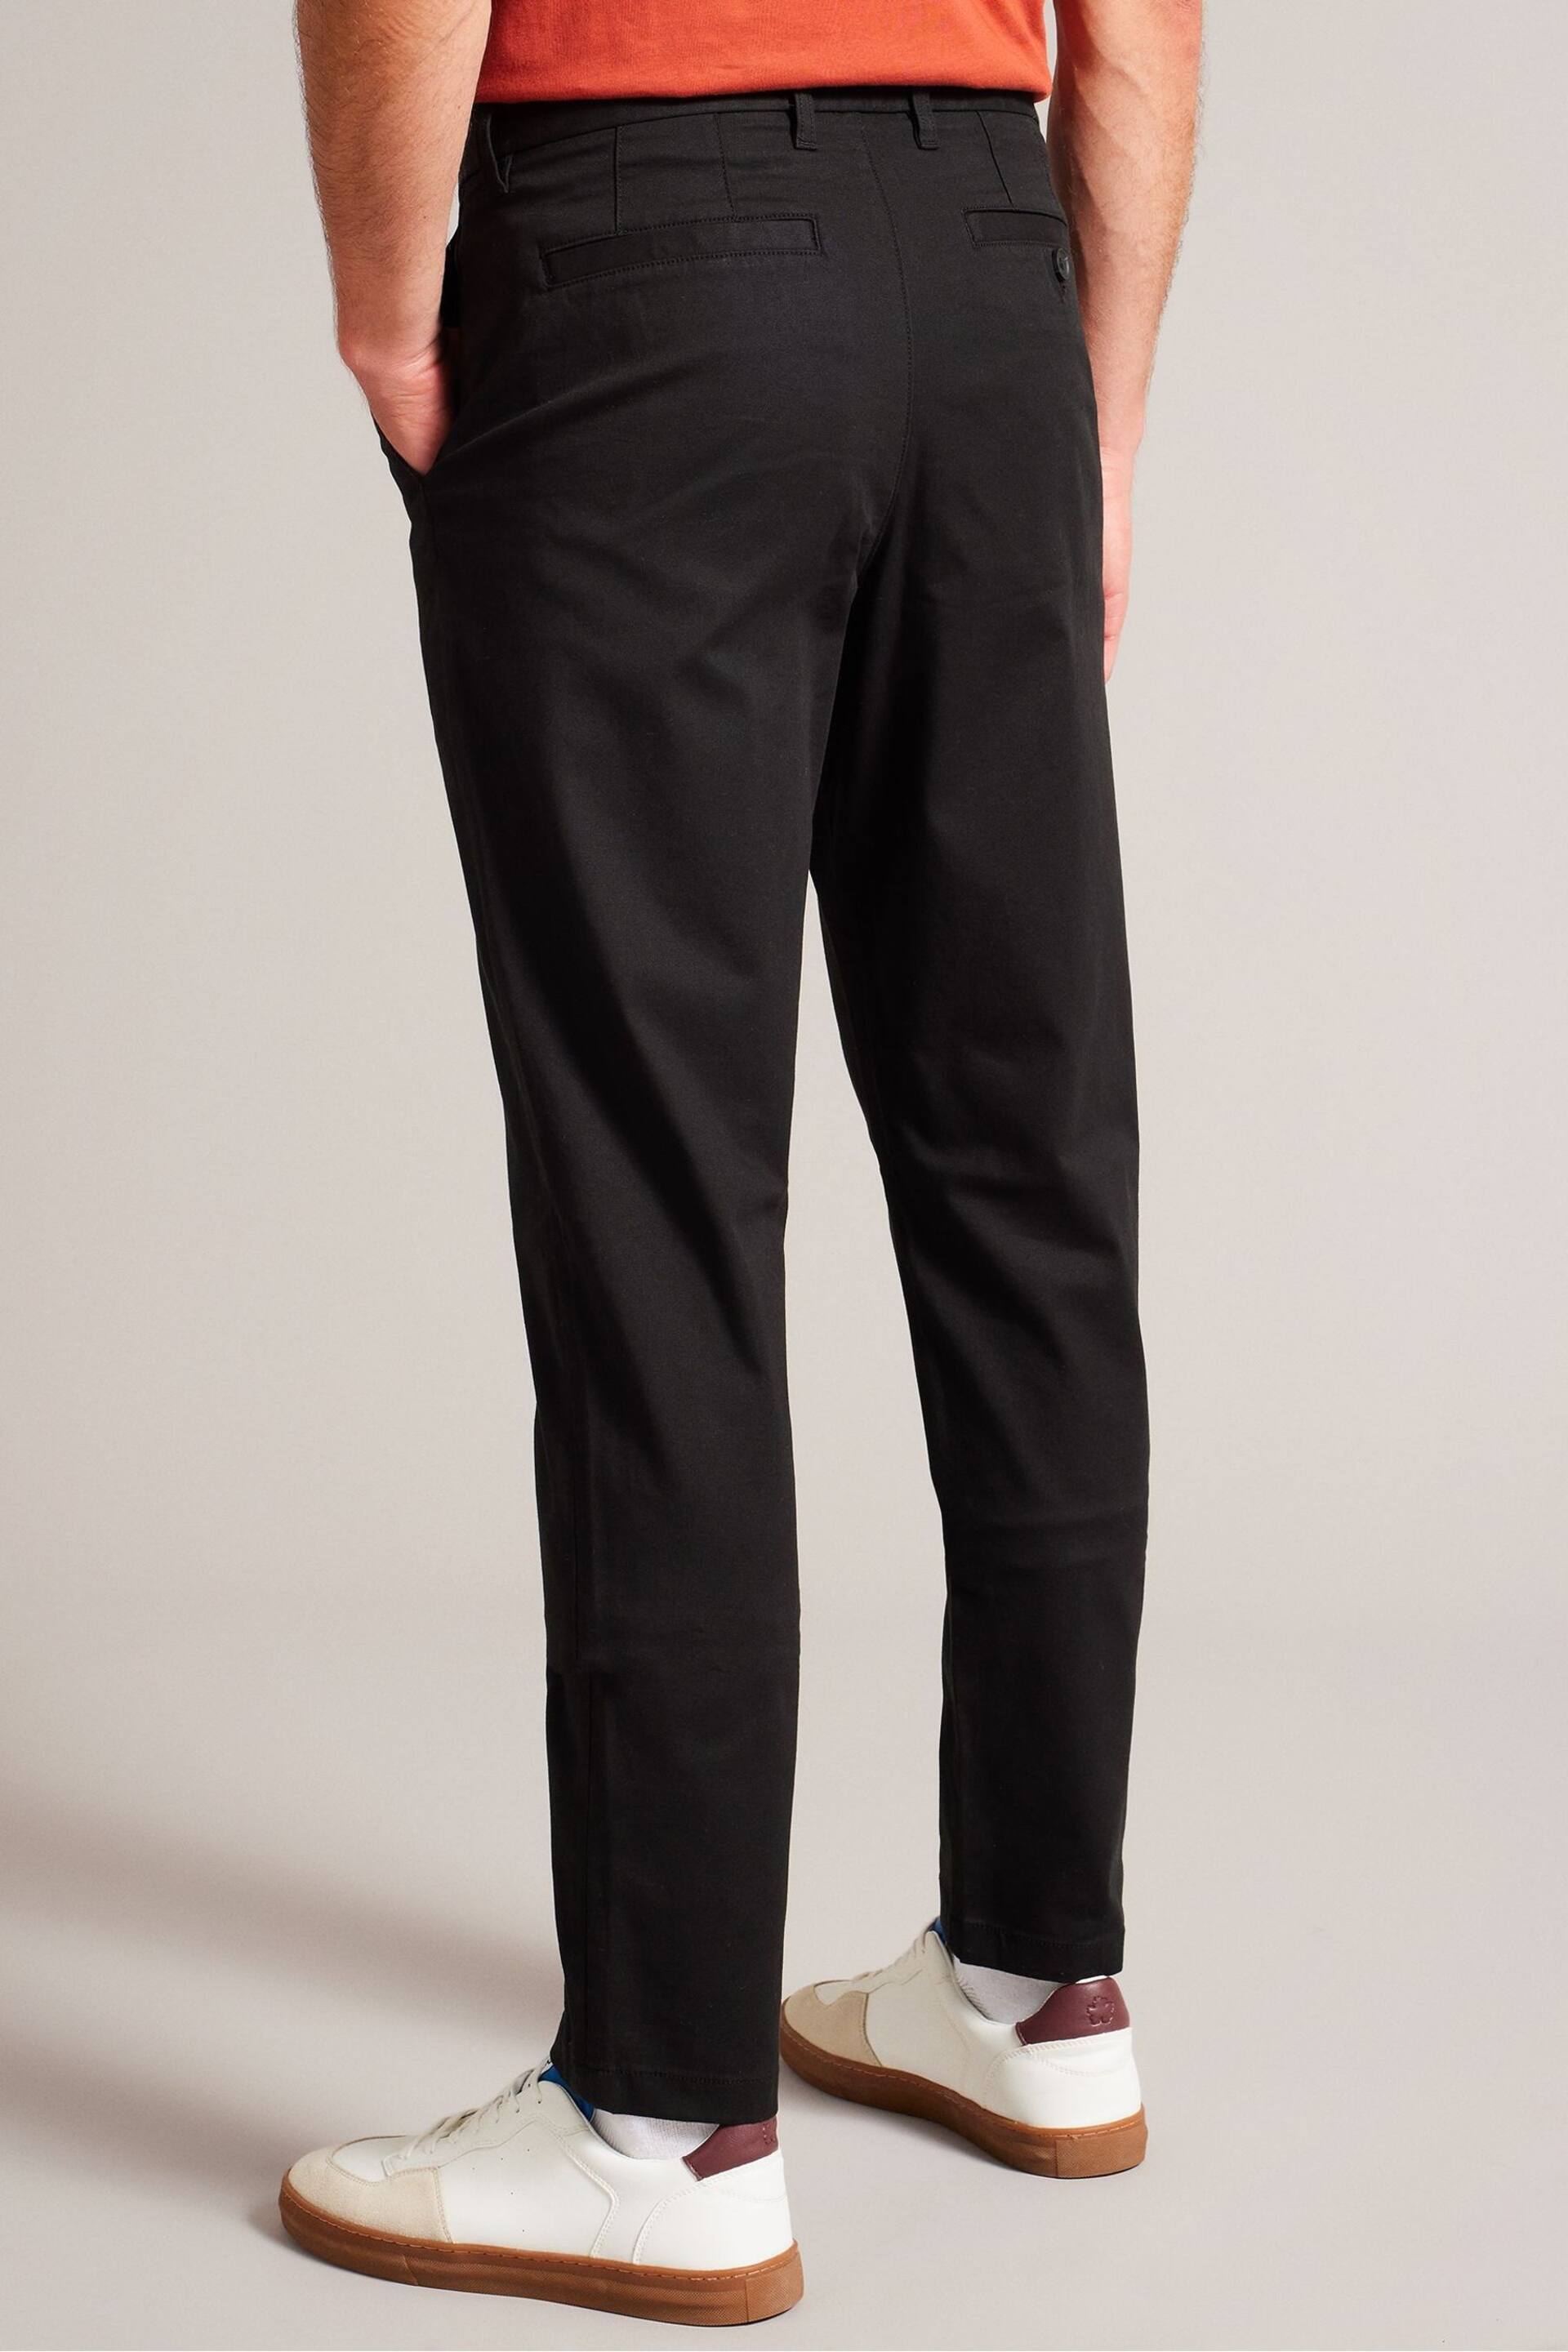 Ted Baker Black Regular Fit Haybrn Textured Chino Trousers - Image 3 of 4